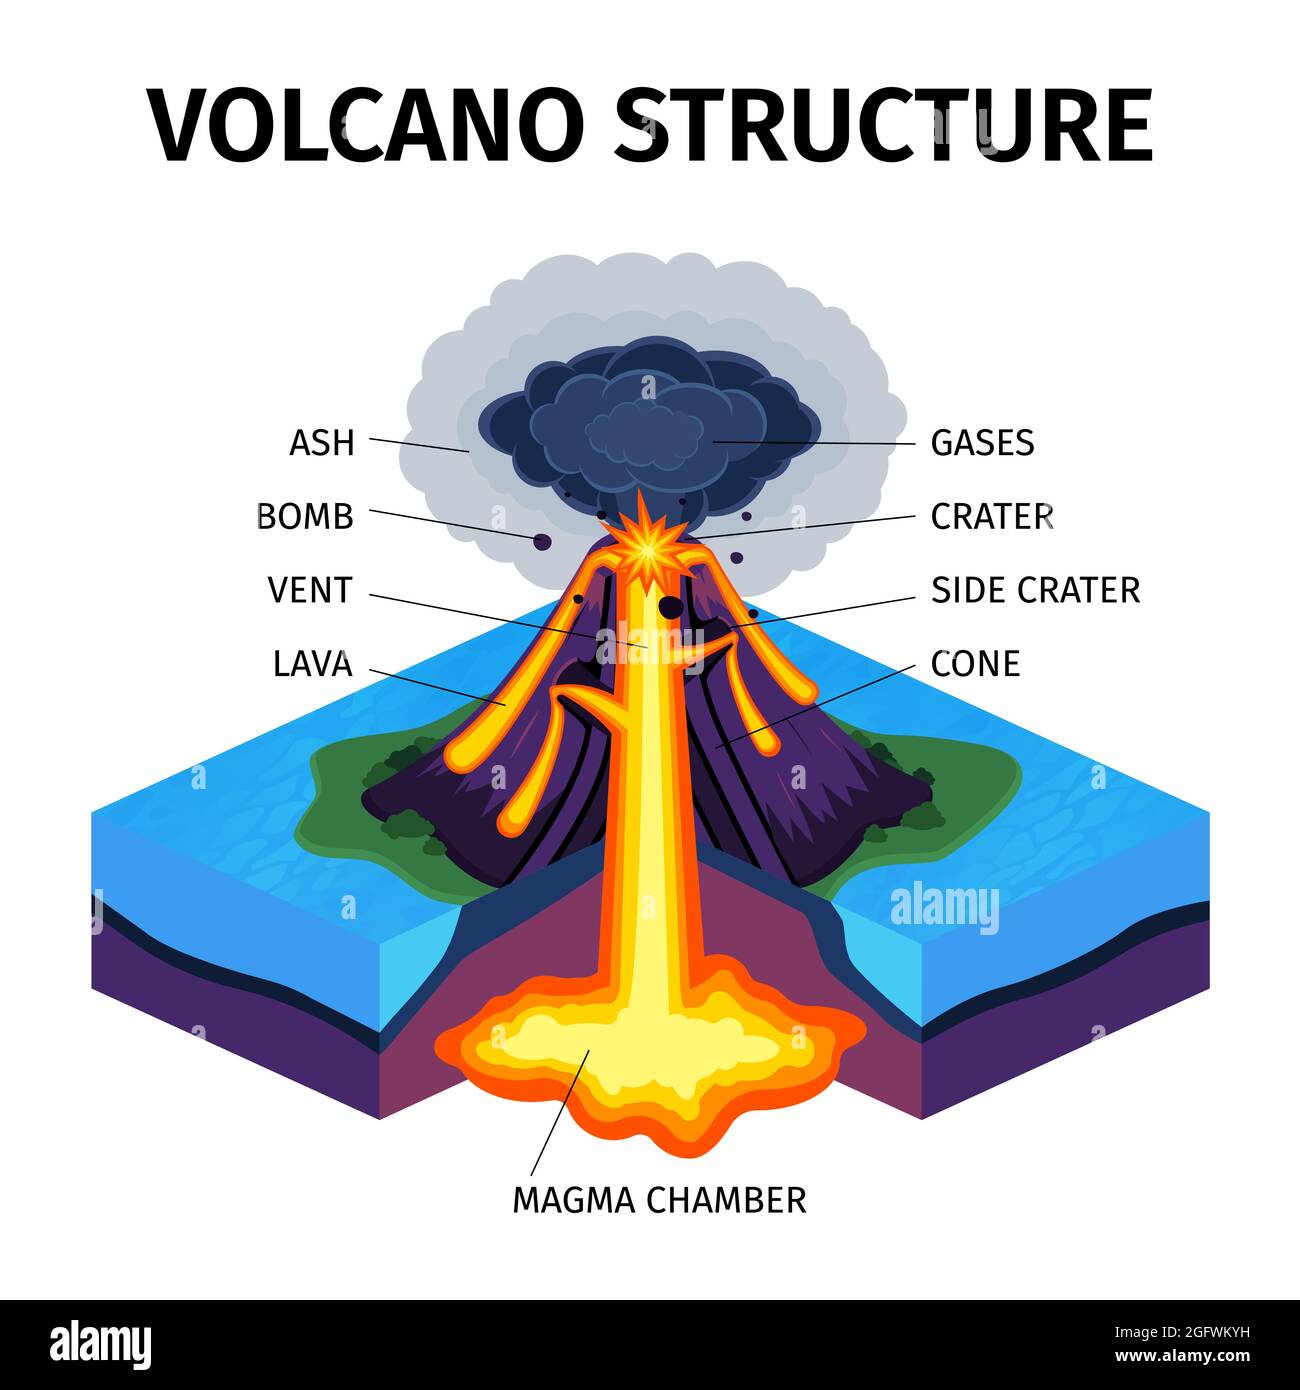 Volcano Diagram High Resolution Stock Photography and Images - Alamy